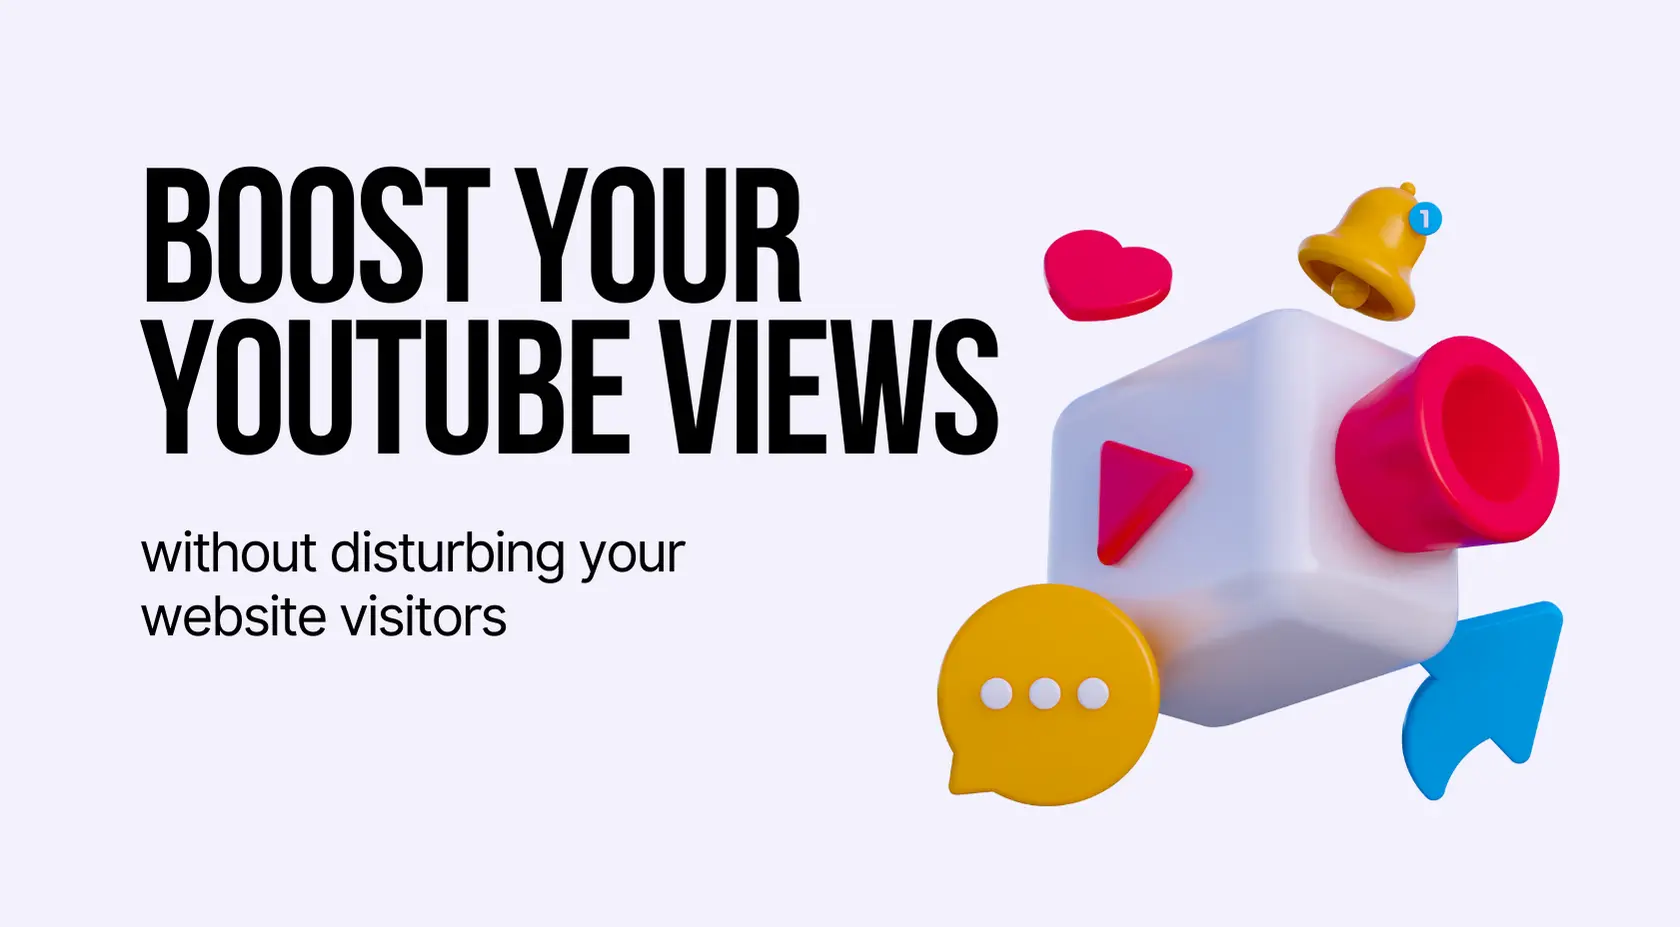 Boost Your YouTube Views without Disturbing Your Website Visitors